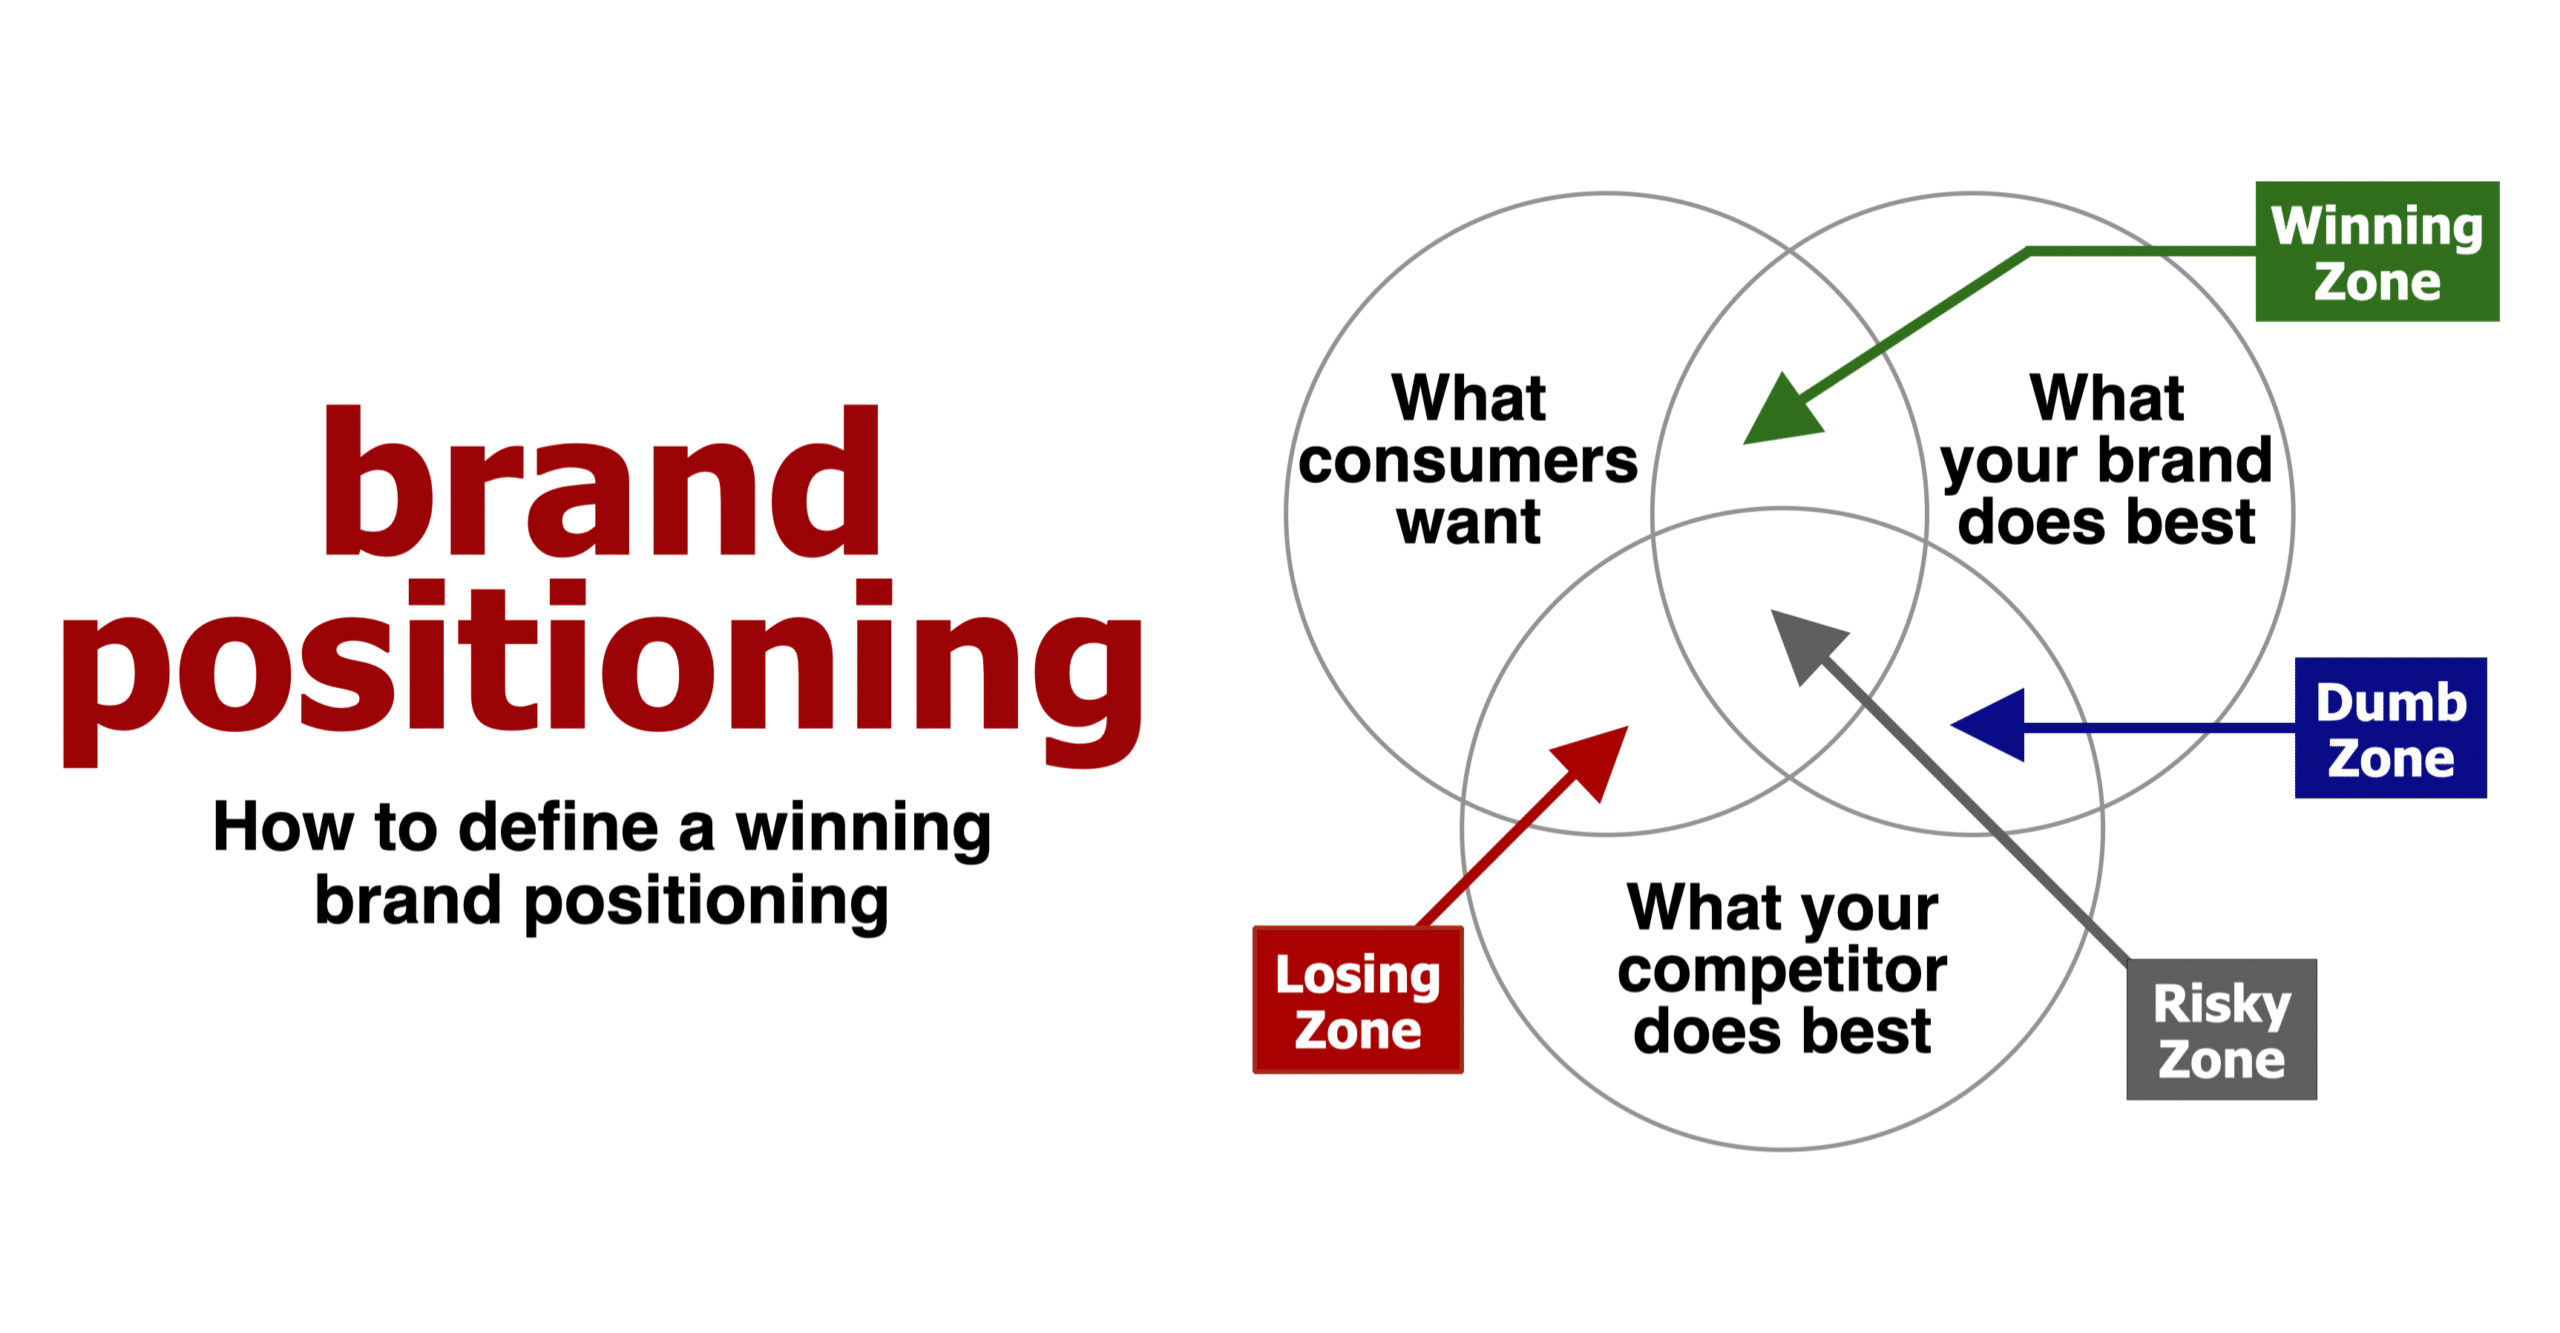 How to define a winning brand positioning